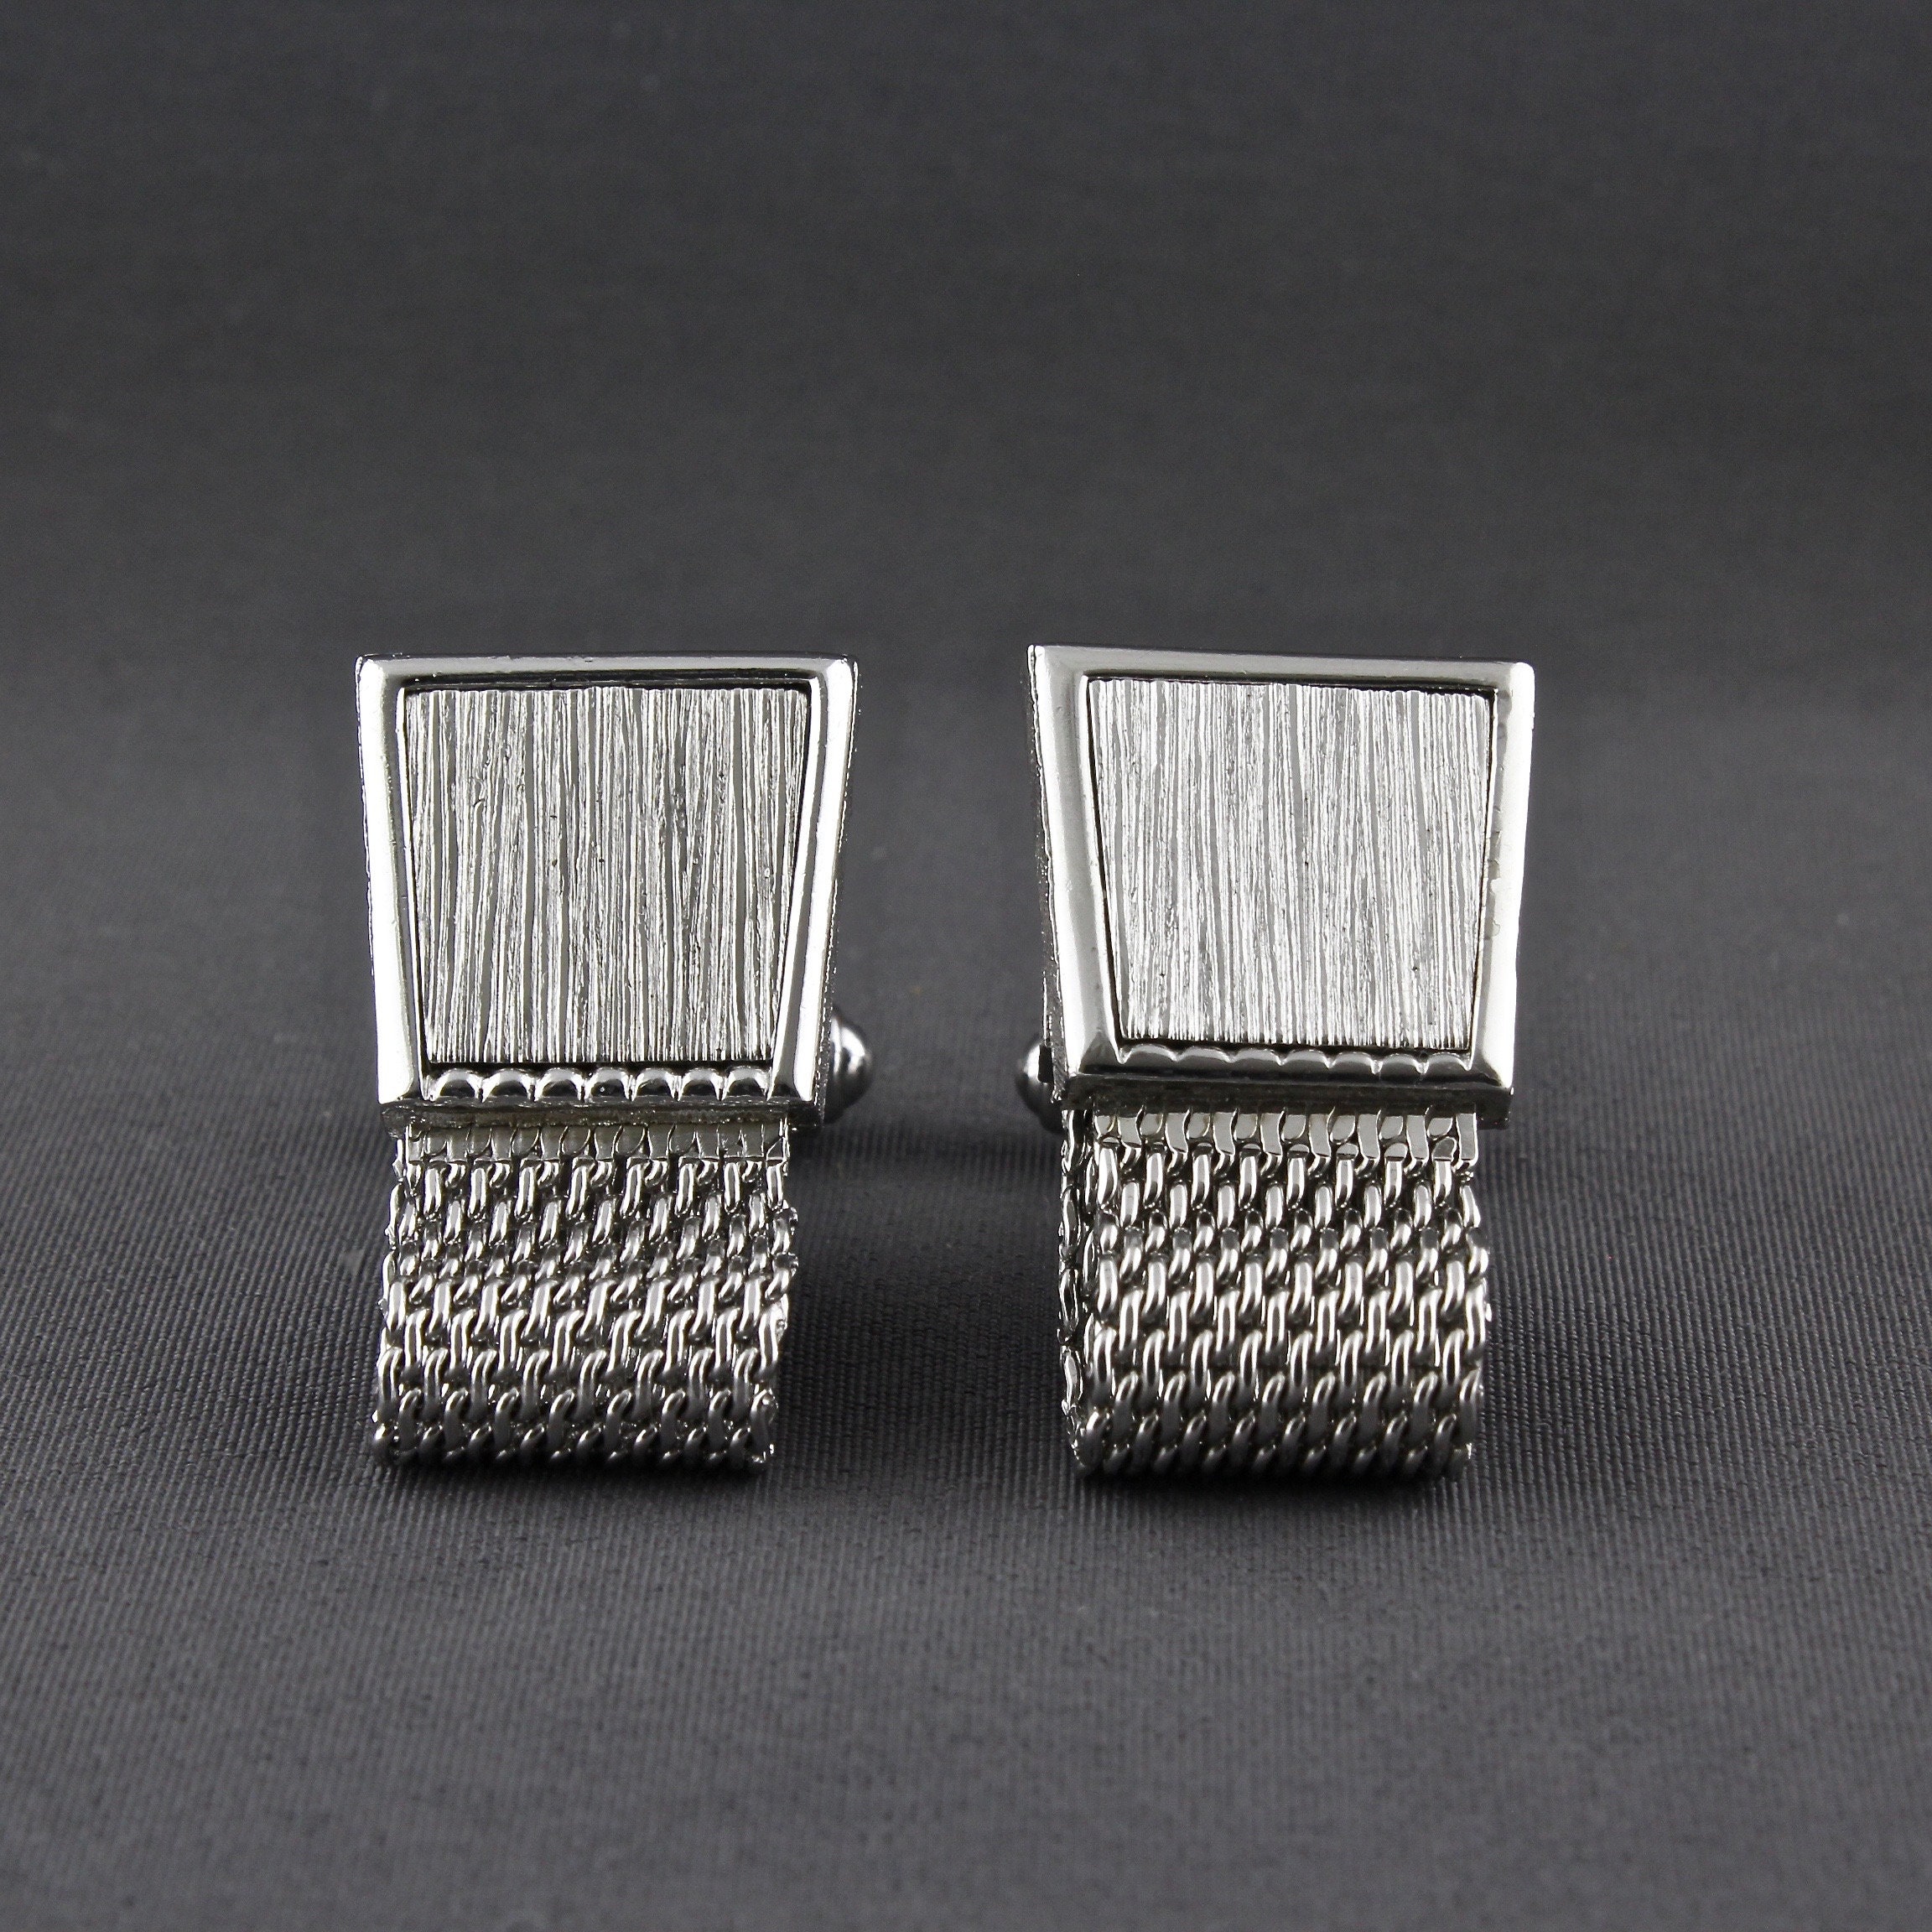 Vintage Swank Solid Wrap Around Style Graduated Square Chain Link Shiny Silver Tone Cufflinks